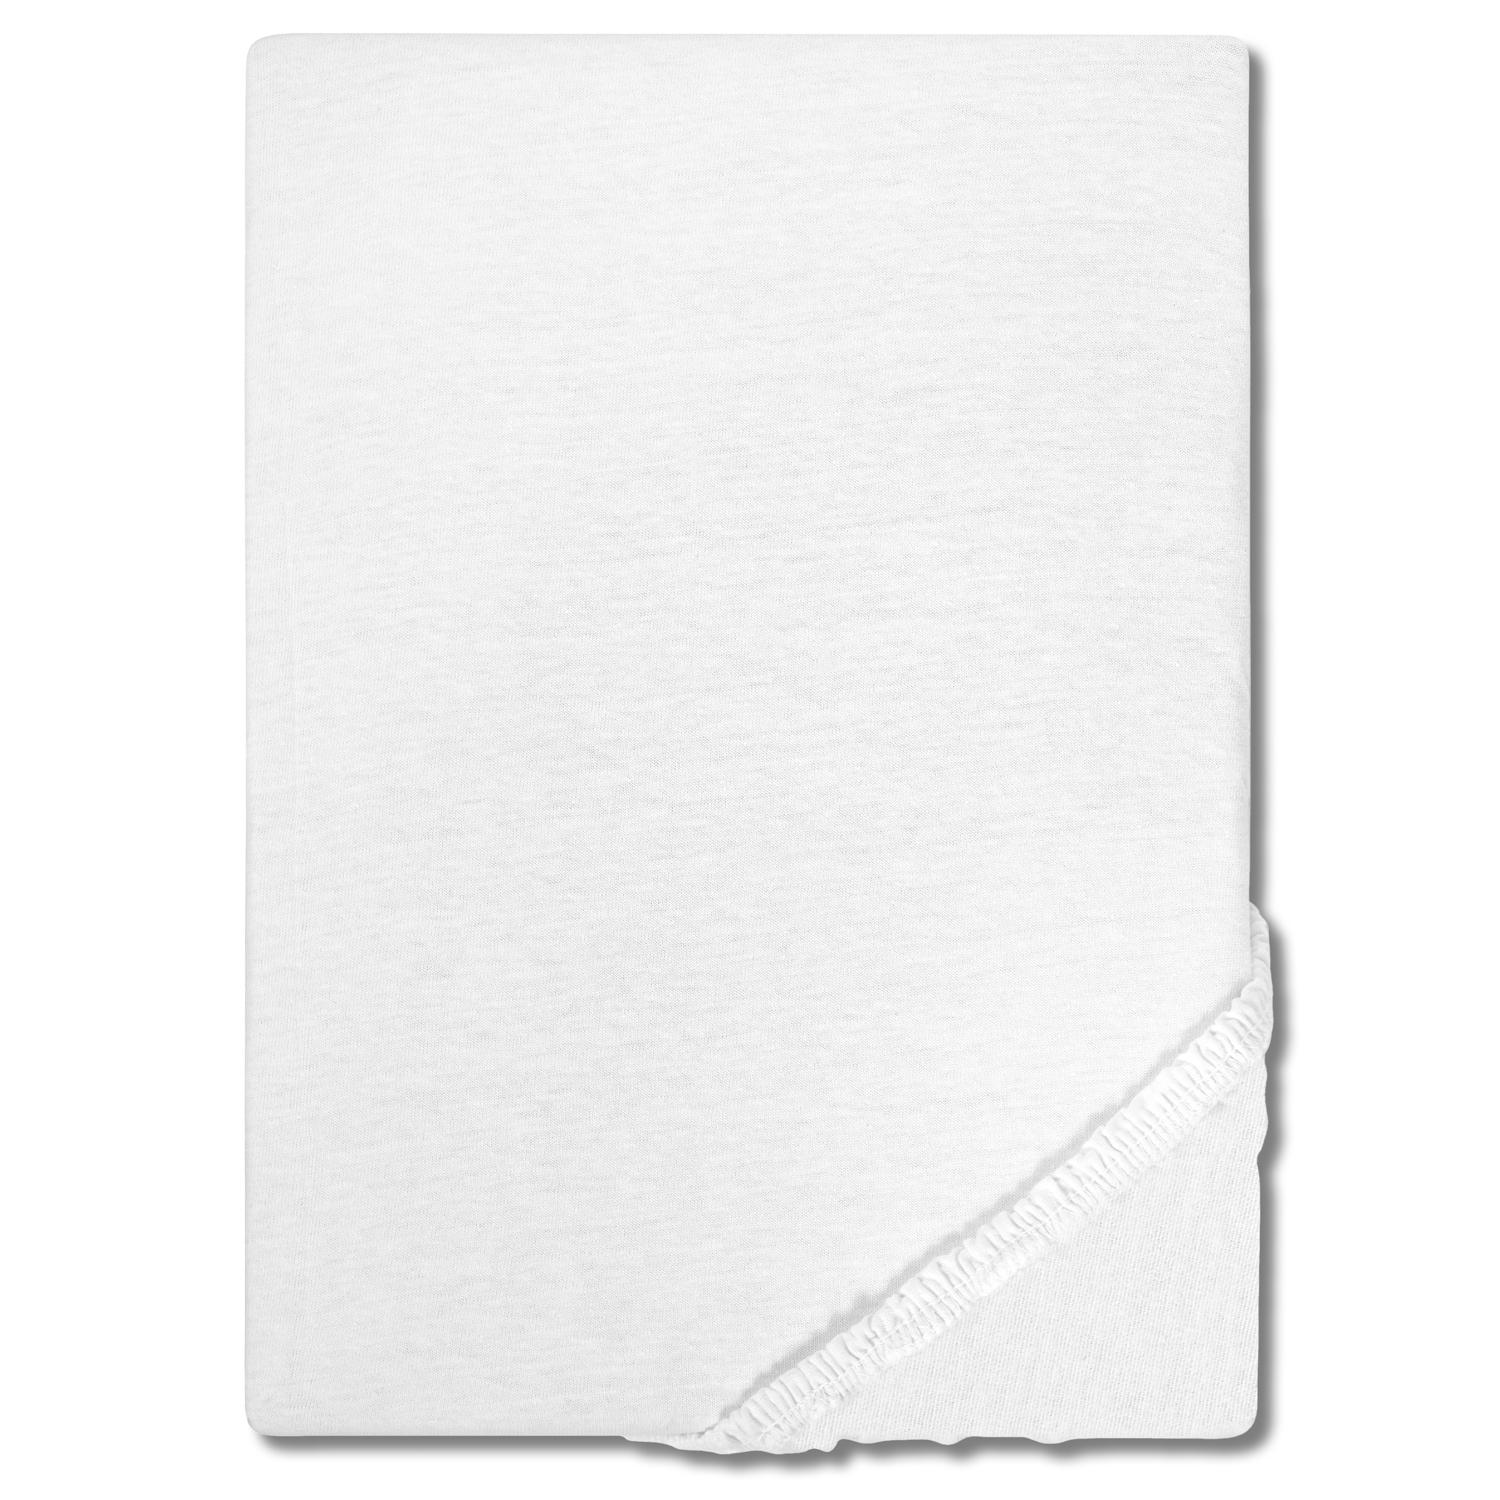 CloudComfort Basic fitted sheet jersey stretch white 120 x 200 cm